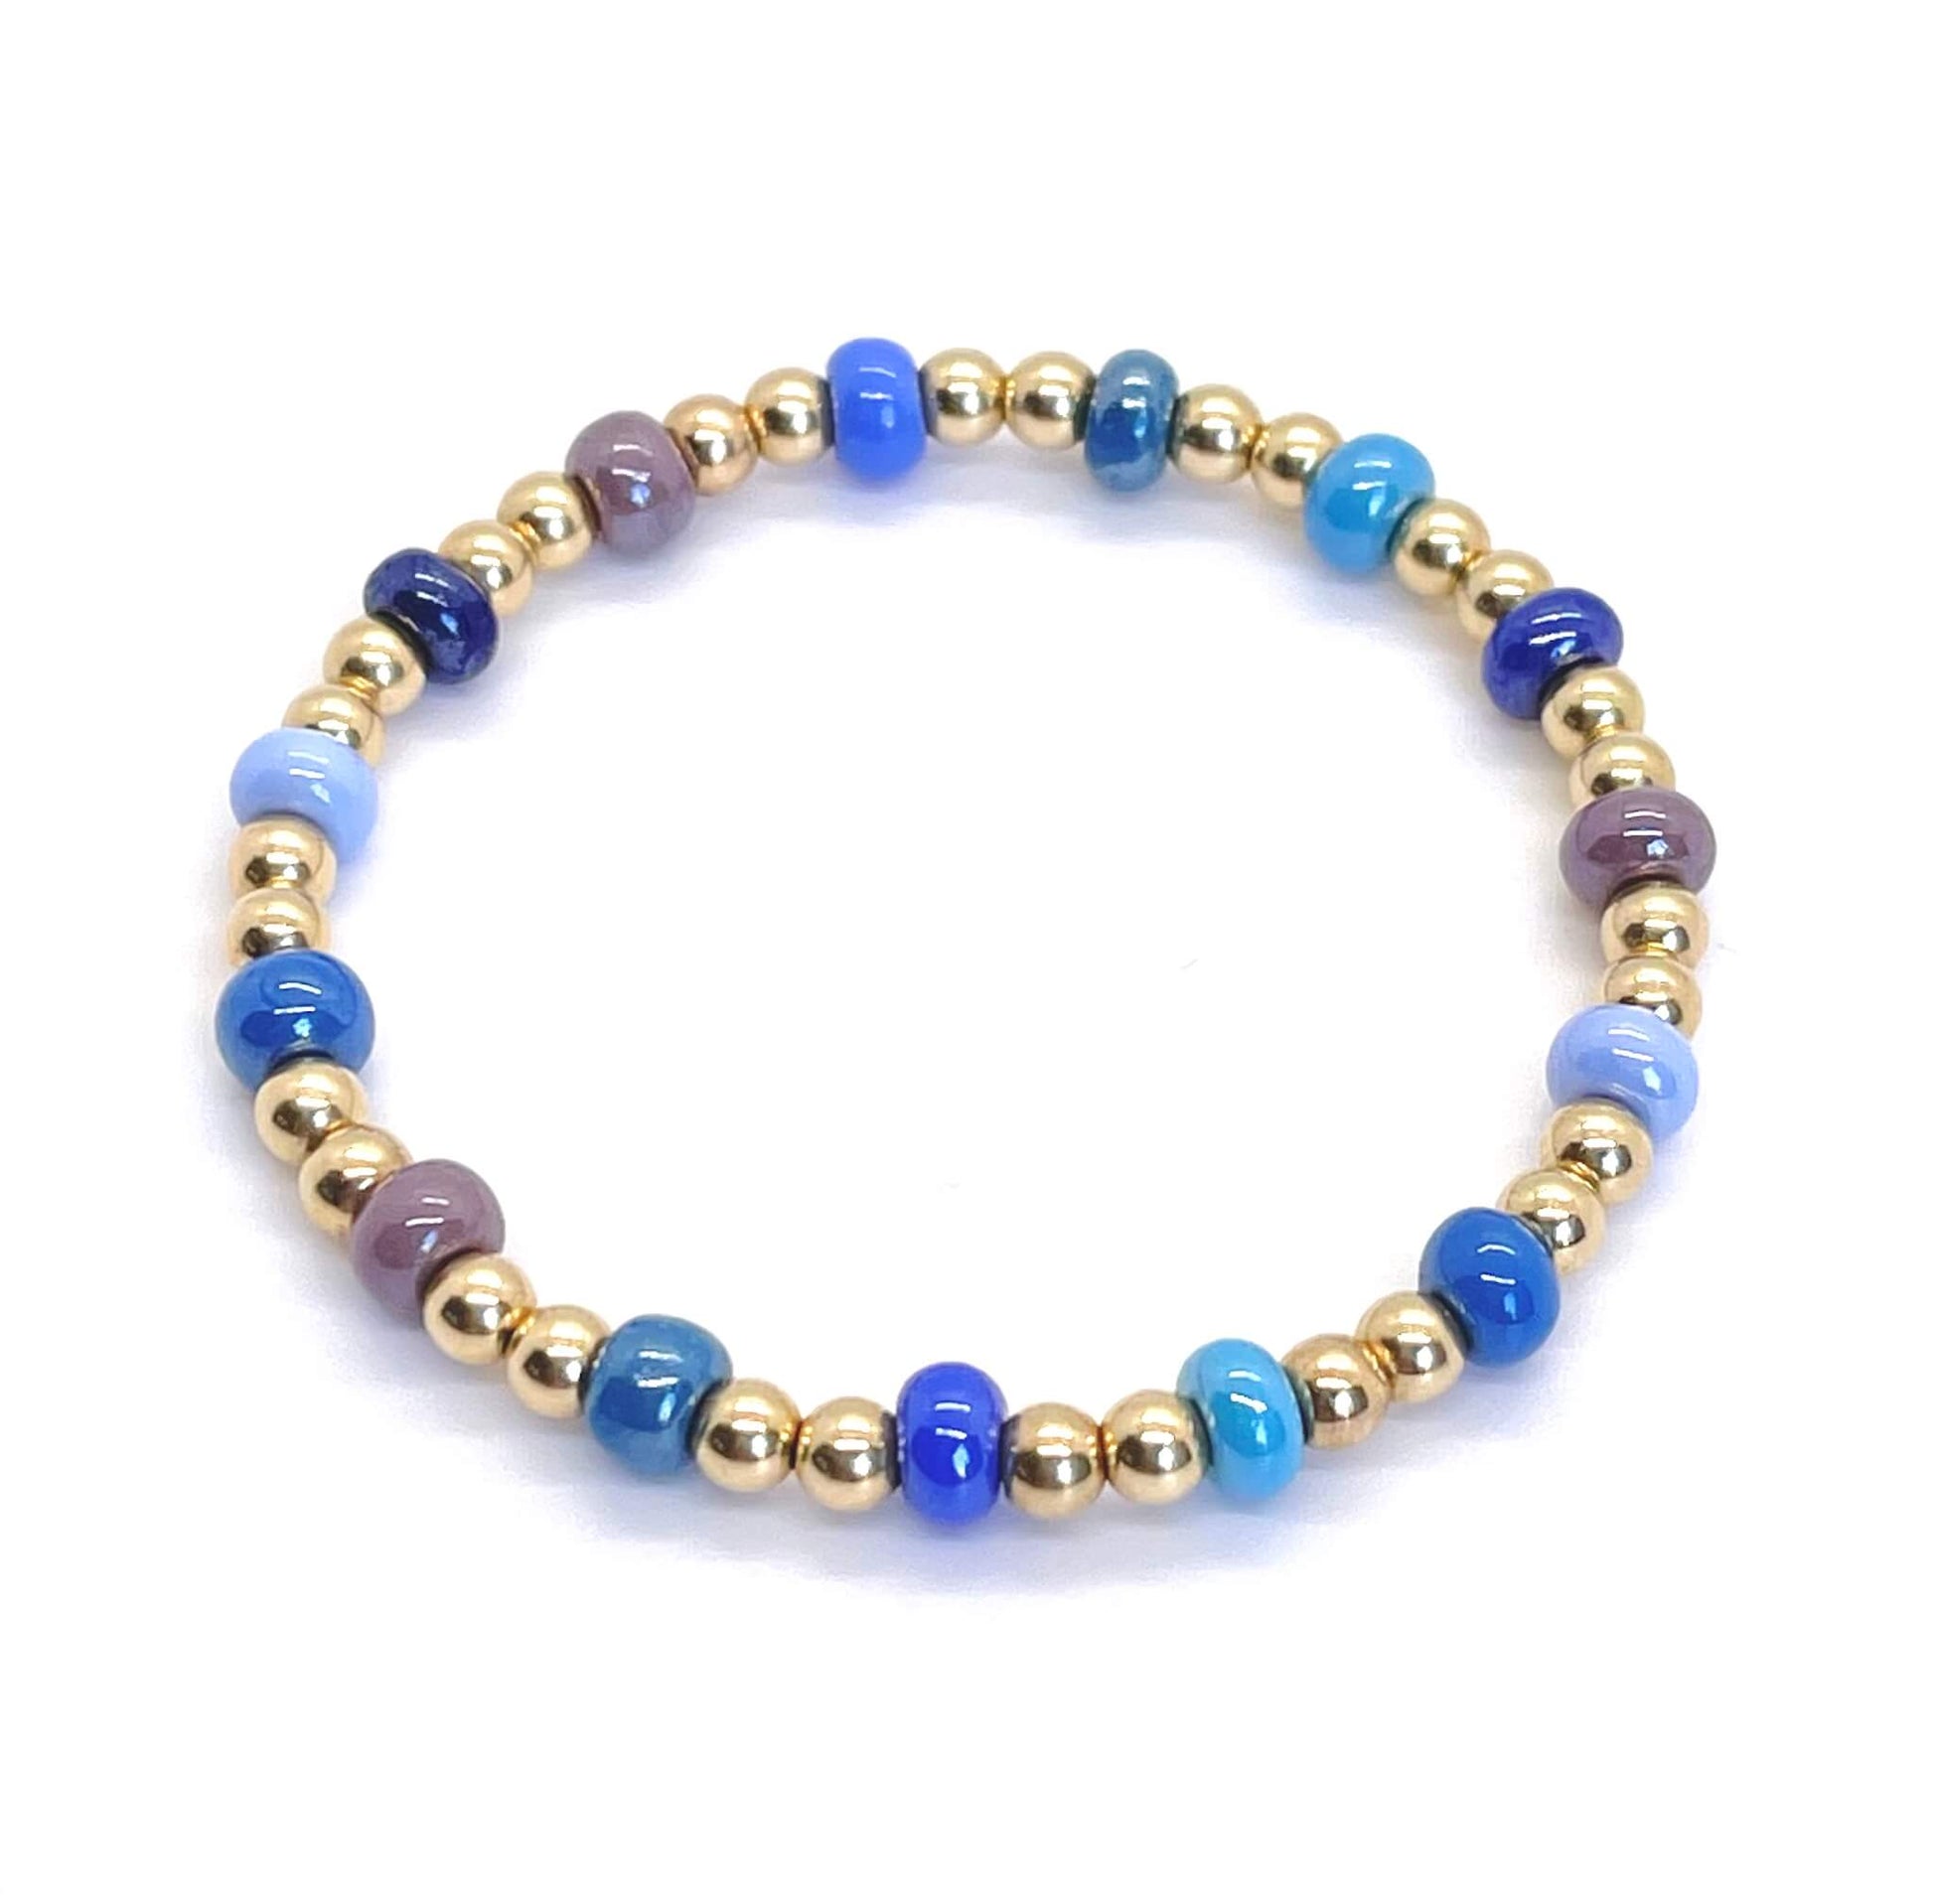 Colorful bracelet with chunky blue glass beads and 4mm gold filled balls on stretch cord.